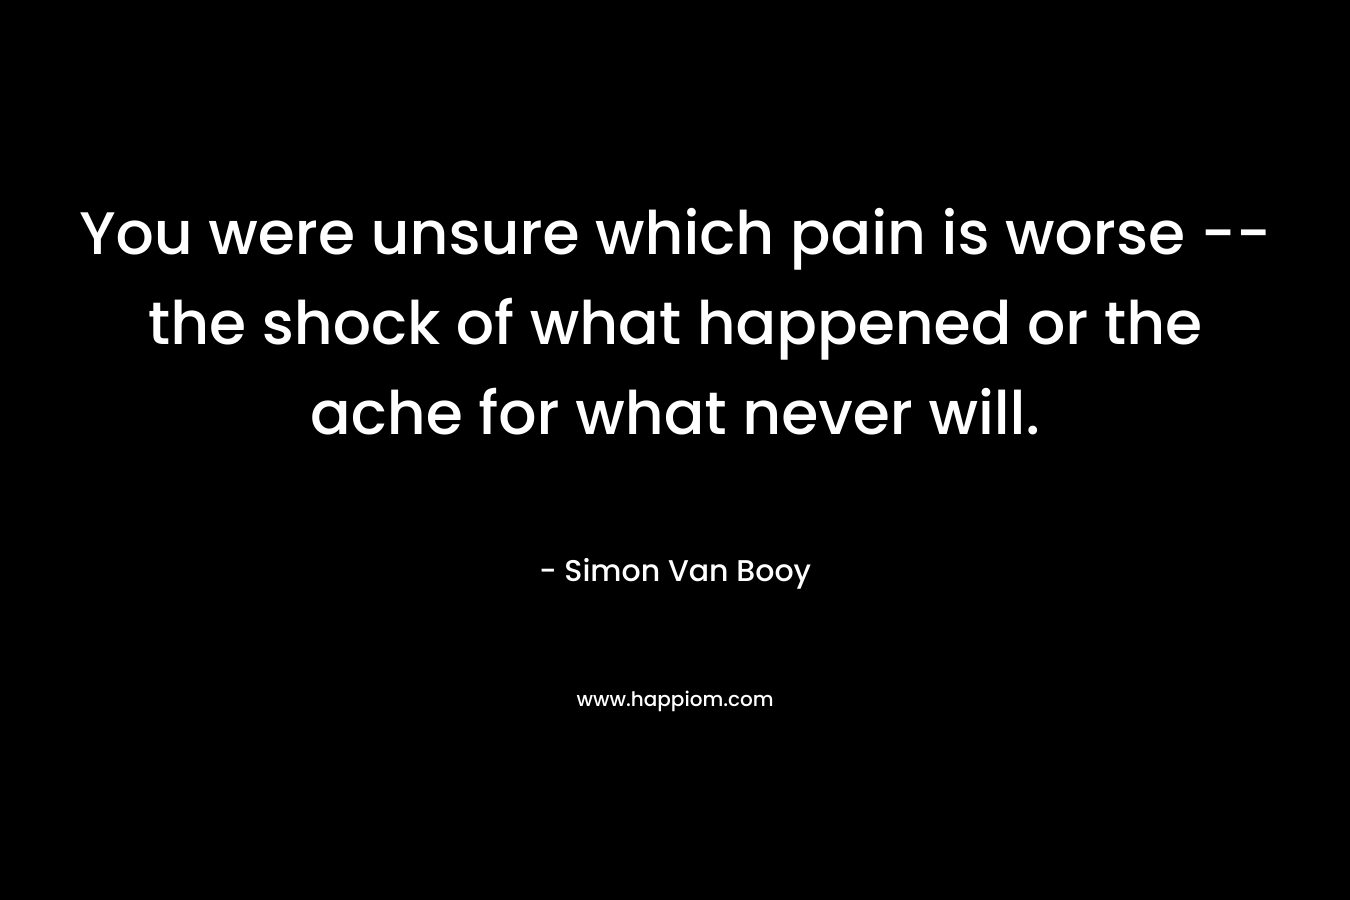 You were unsure which pain is worse -- the shock of what happened or the ache for what never will.